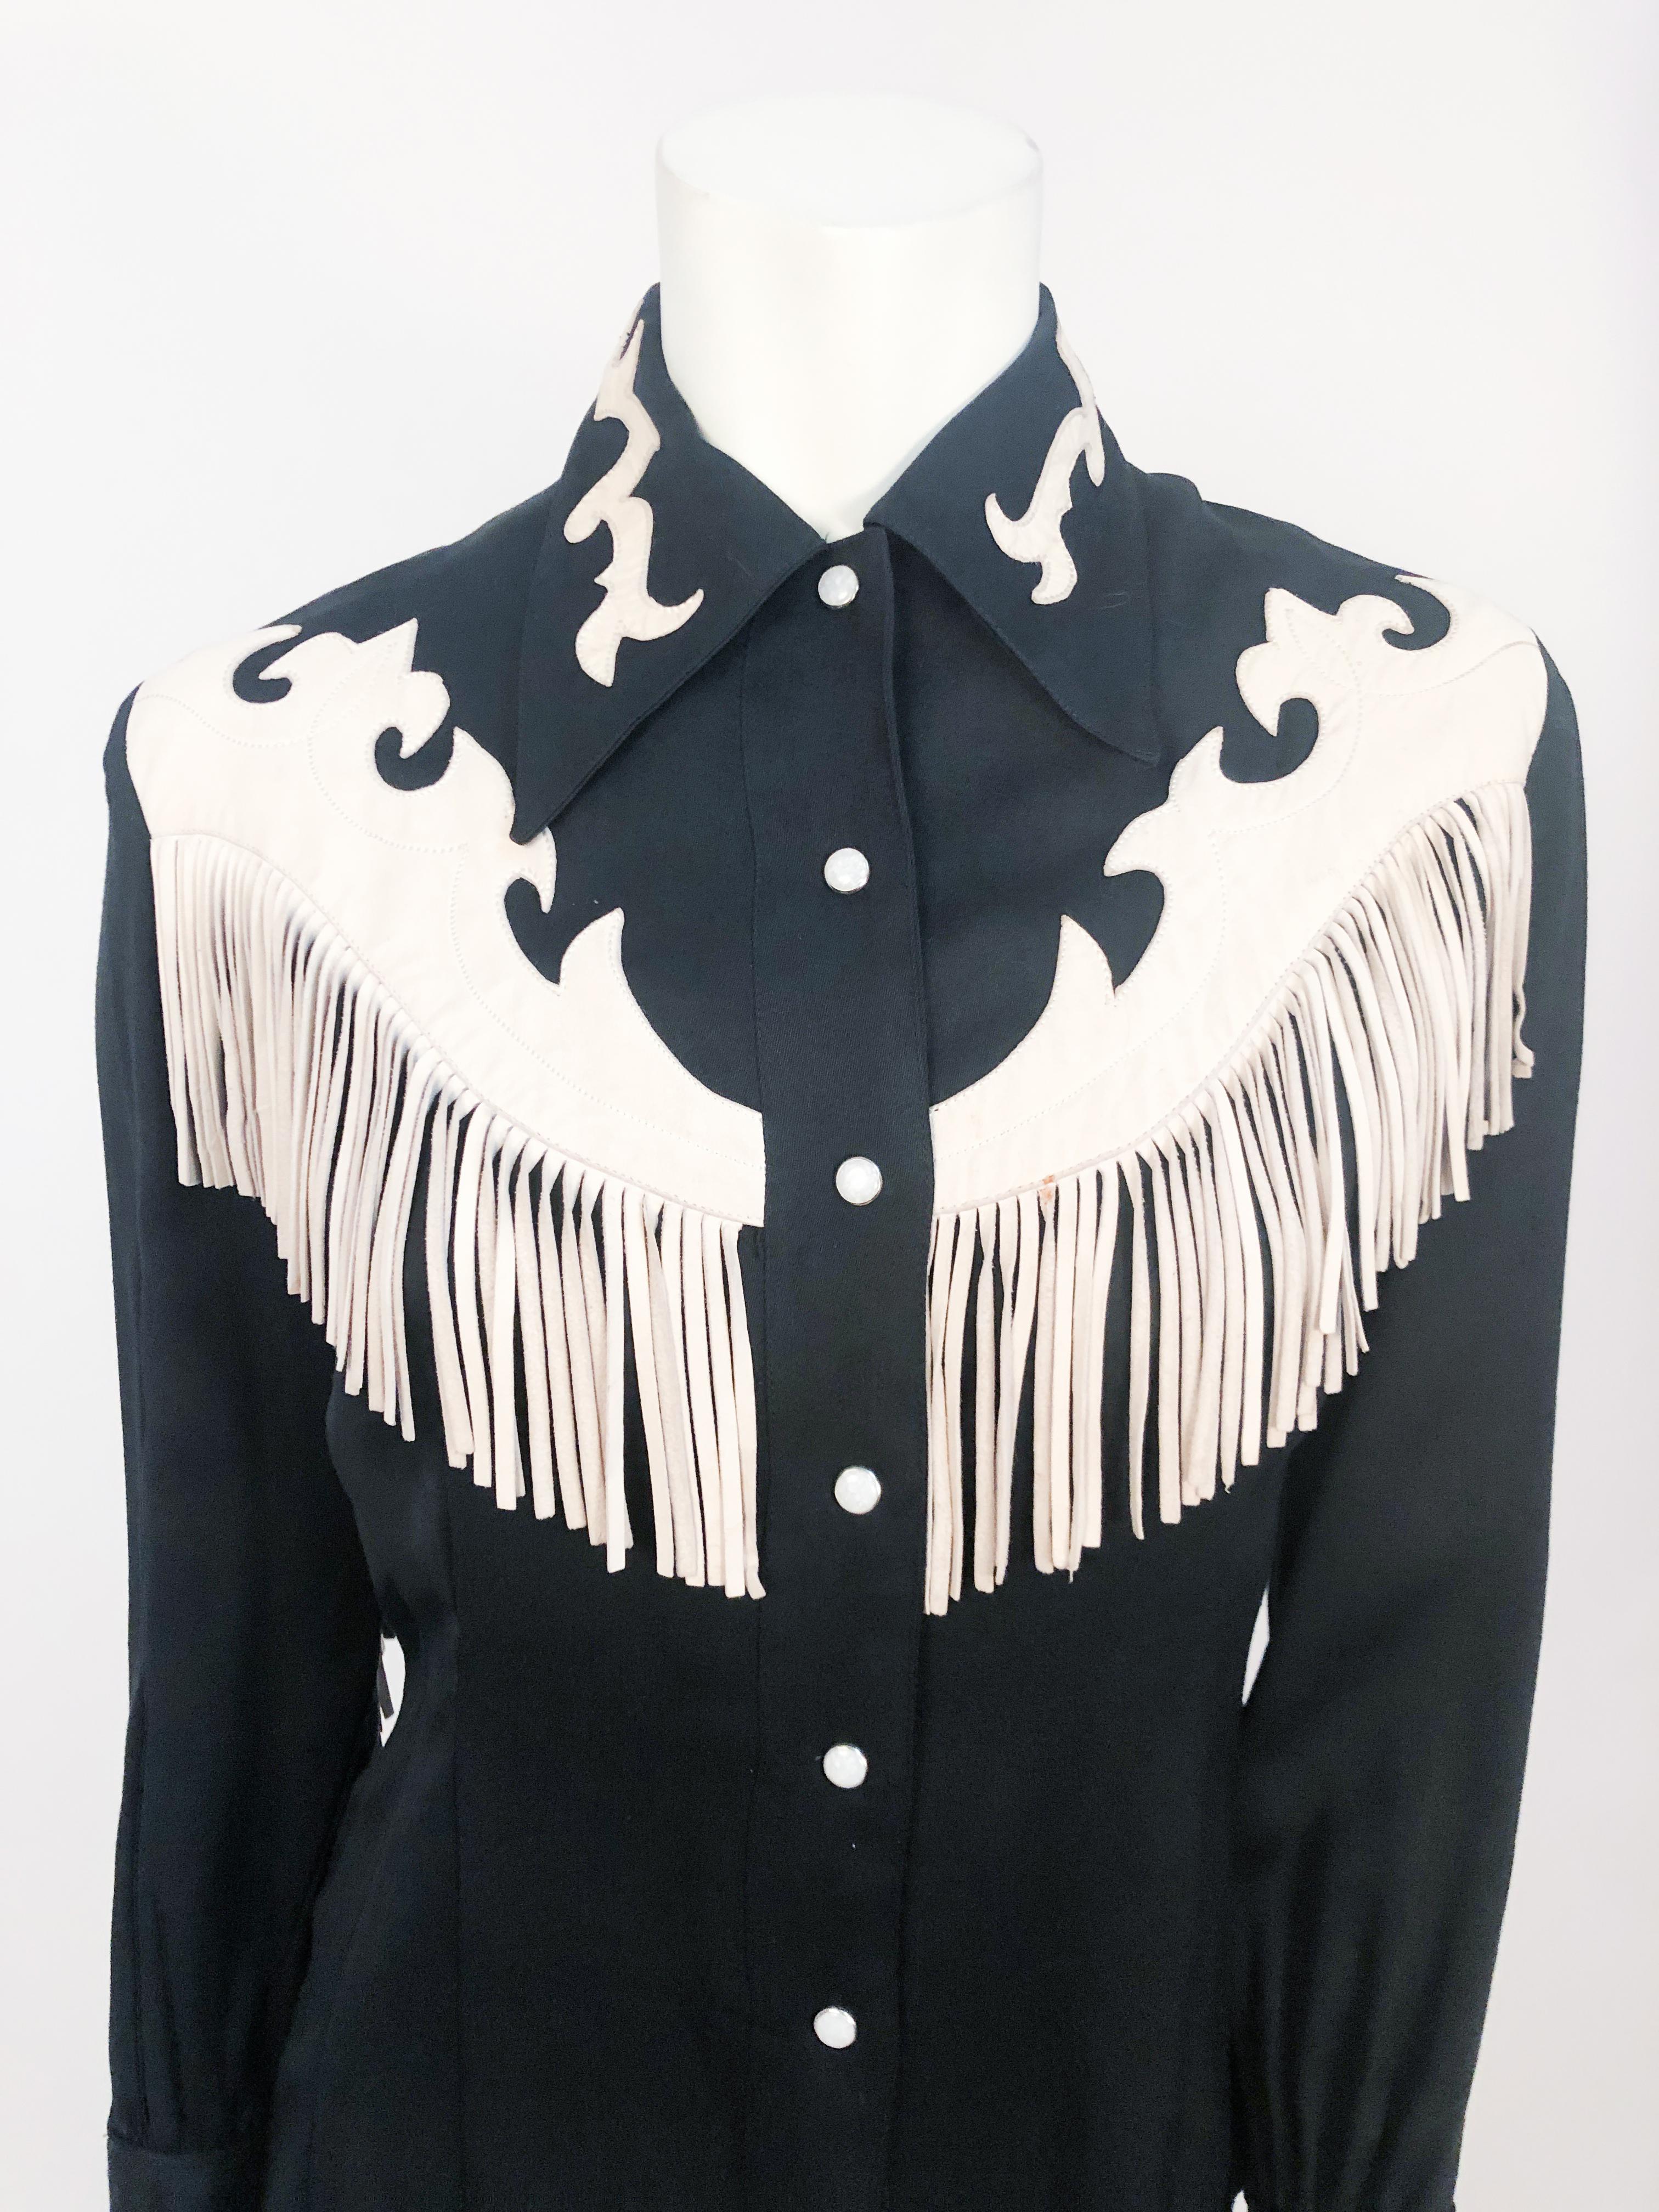 1950s Western Shirt with Cream Leather Appliqué details and Fringe along the sleeves and back. Pearl Snap button closure along the front.